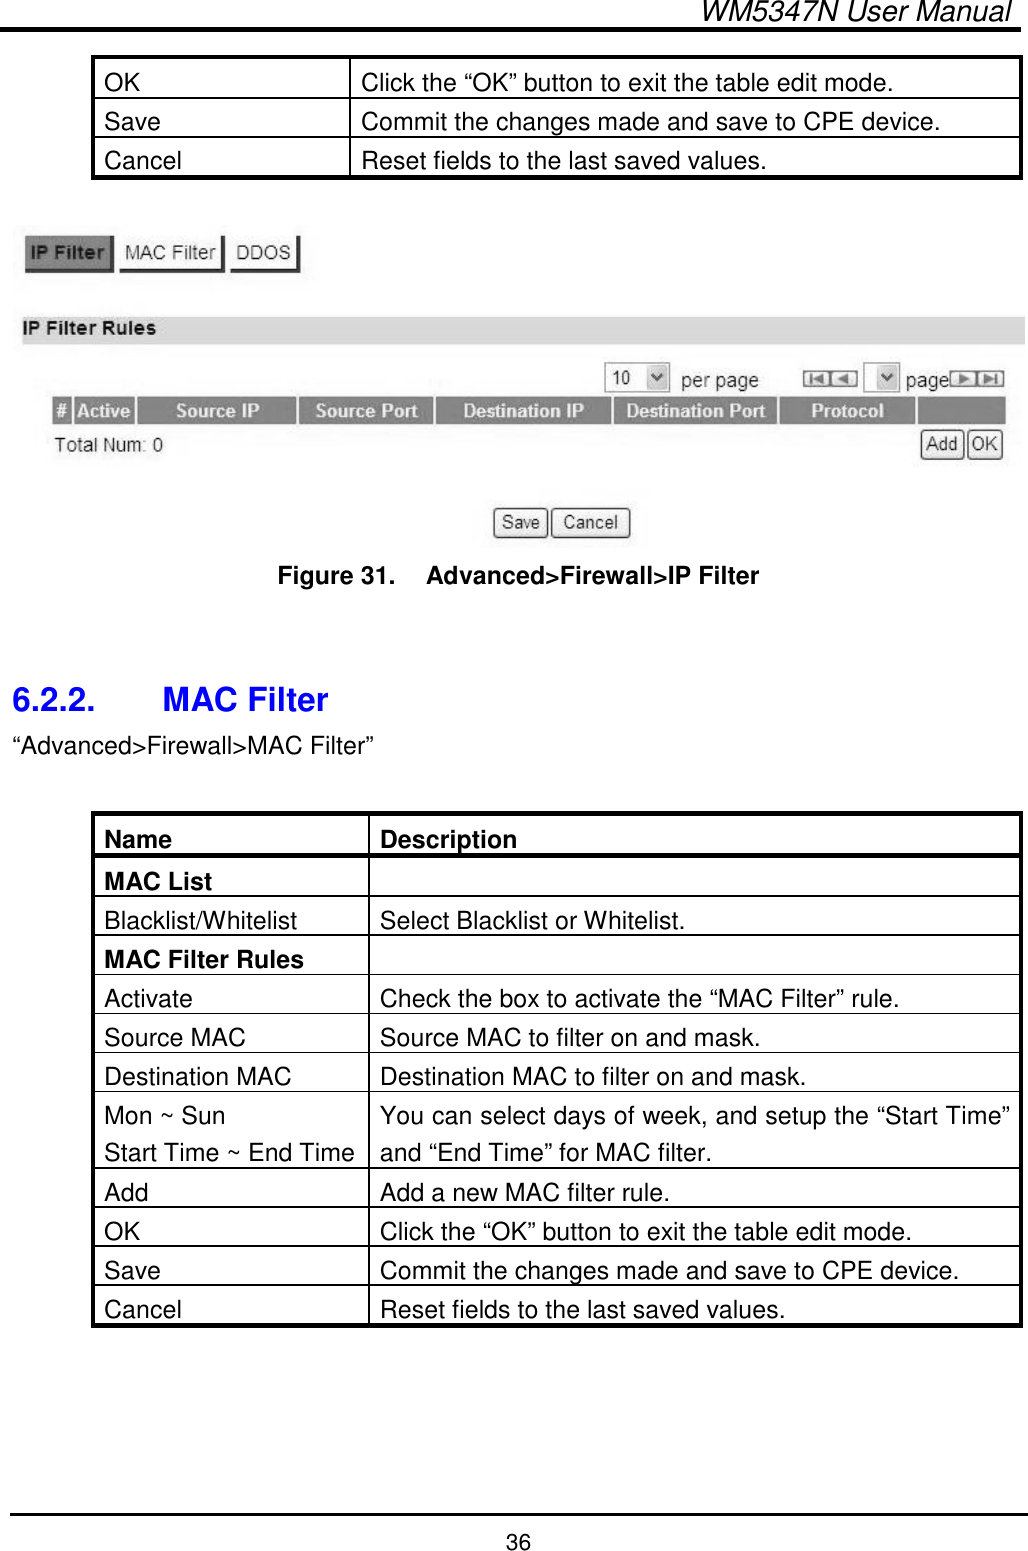  WM5347N User Manual  36 OK  Click the “OK” button to exit the table edit mode. Save  Commit the changes made and save to CPE device. Cancel  Reset fields to the last saved values.   Figure 31.   Advanced&gt;Firewall&gt;IP Filter   6.2.2.  MAC Filter “Advanced&gt;Firewall&gt;MAC Filter”  Name  Description MAC List   Blacklist/Whitelist  Select Blacklist or Whitelist. MAC Filter Rules   Activate  Check the box to activate the “MAC Filter” rule. Source MAC  Source MAC to filter on and mask. Destination MAC  Destination MAC to filter on and mask. Mon ~ Sun Start Time ~ End Time You can select days of week, and setup the “Start Time” and “End Time” for MAC filter. Add  Add a new MAC filter rule. OK  Click the “OK” button to exit the table edit mode. Save  Commit the changes made and save to CPE device. Cancel  Reset fields to the last saved values.  